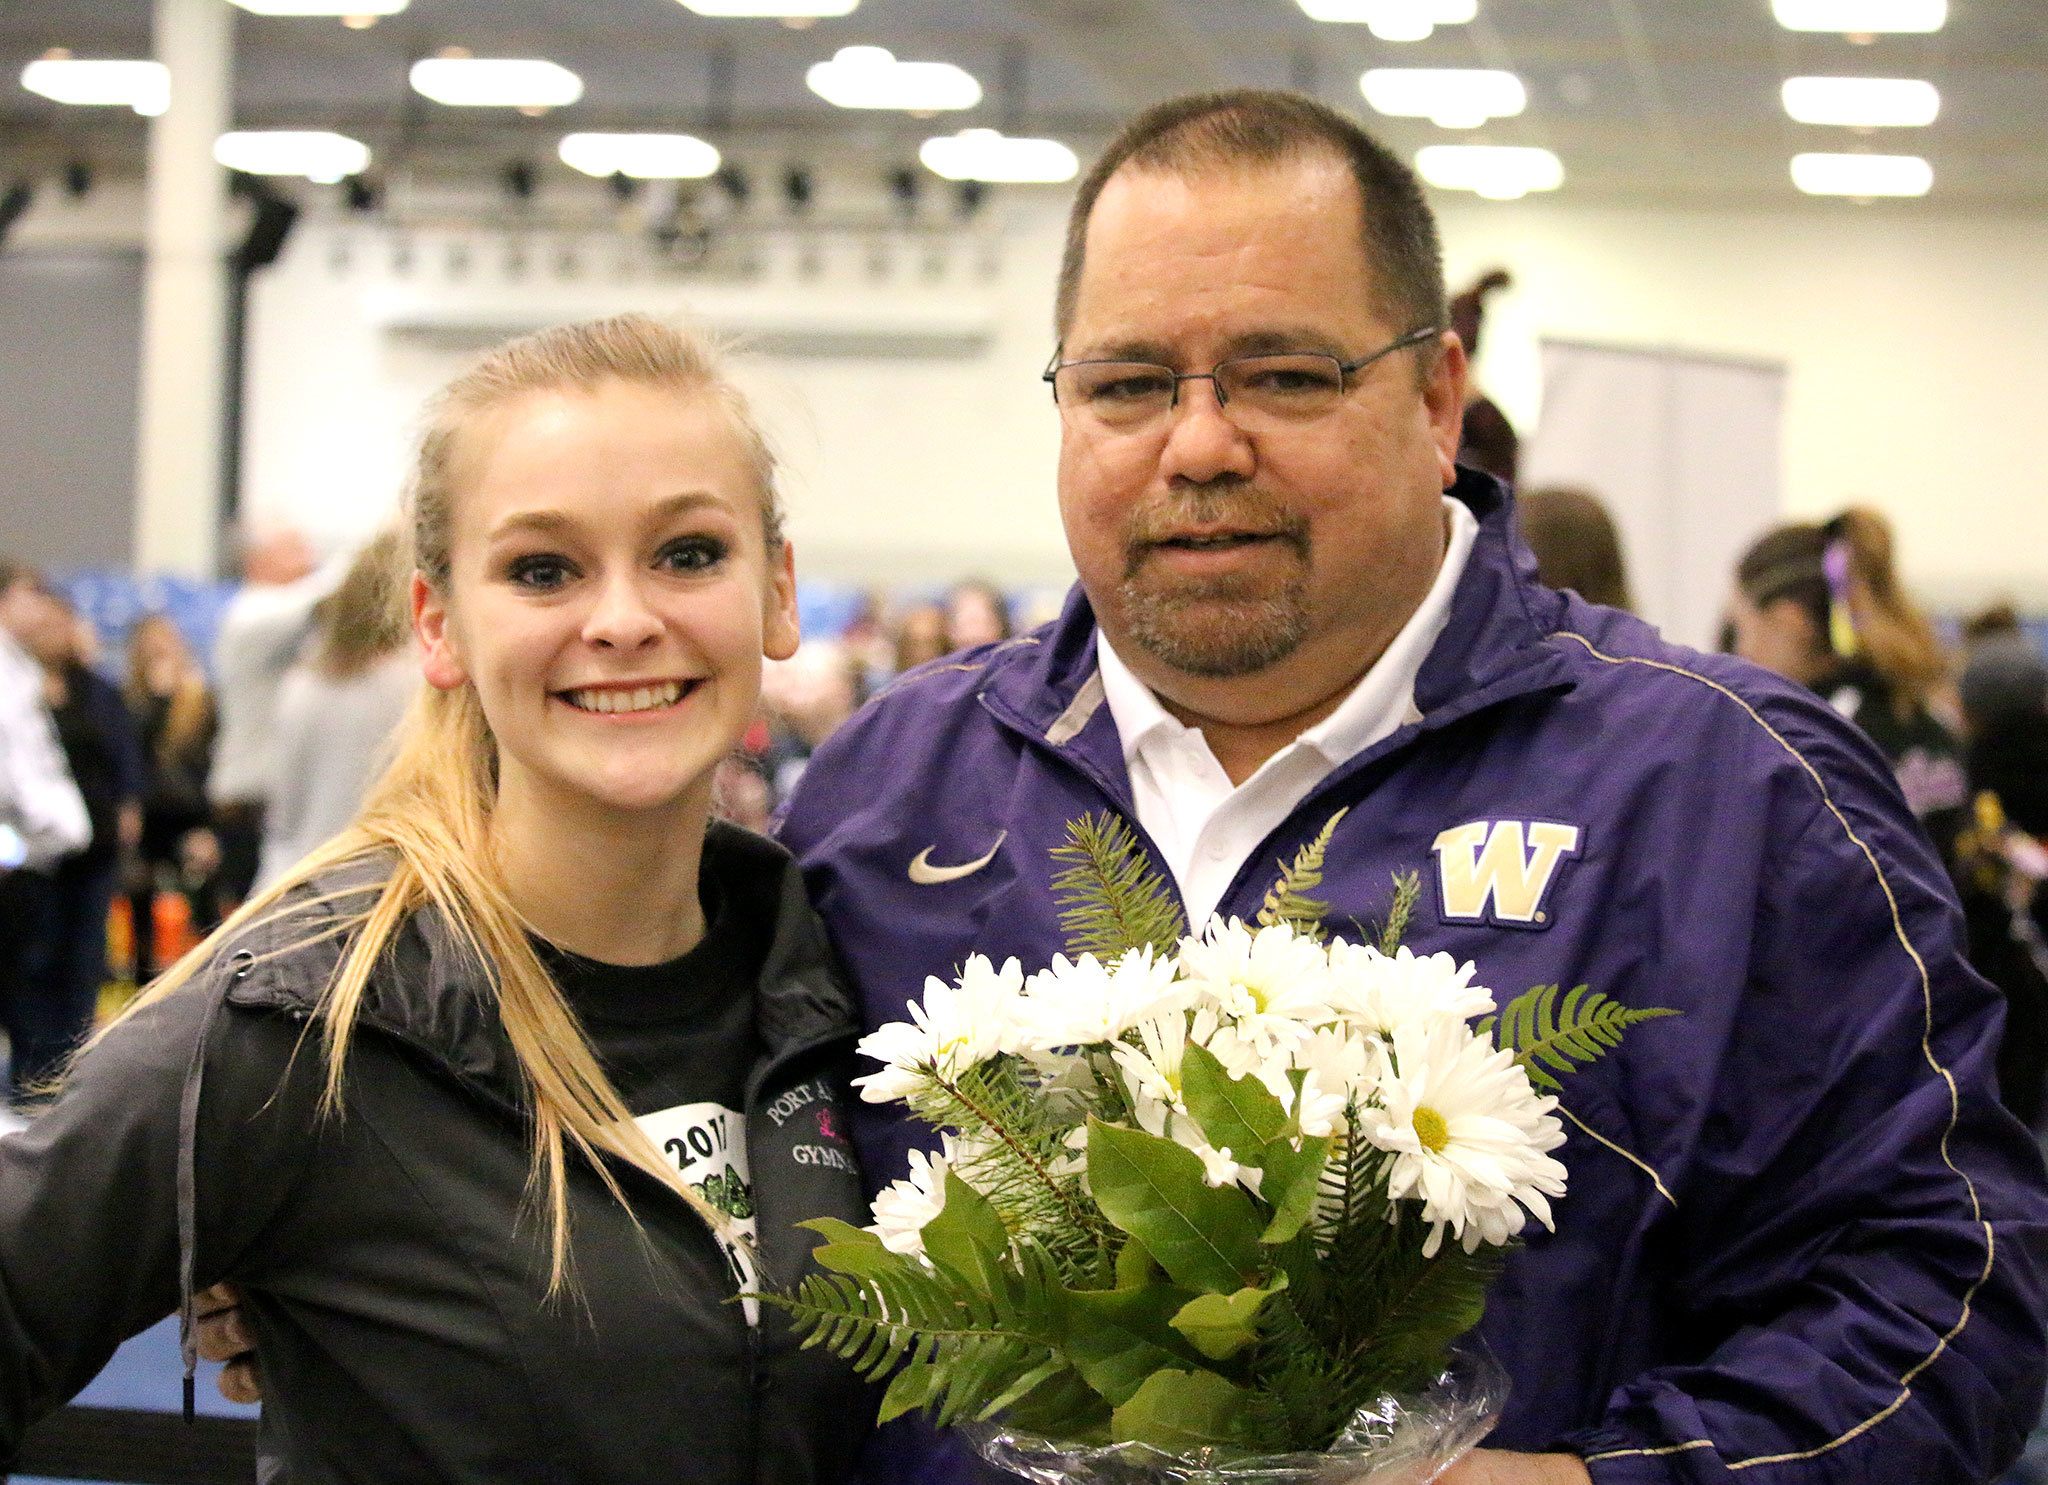 Port Angeles gymnast Laura Rooney and Port Angeles High School Athletic Director Dwayne Johnson at the WIAA 2A/3A State Gymnastics meet at the Tacoma Dome earlier this month.